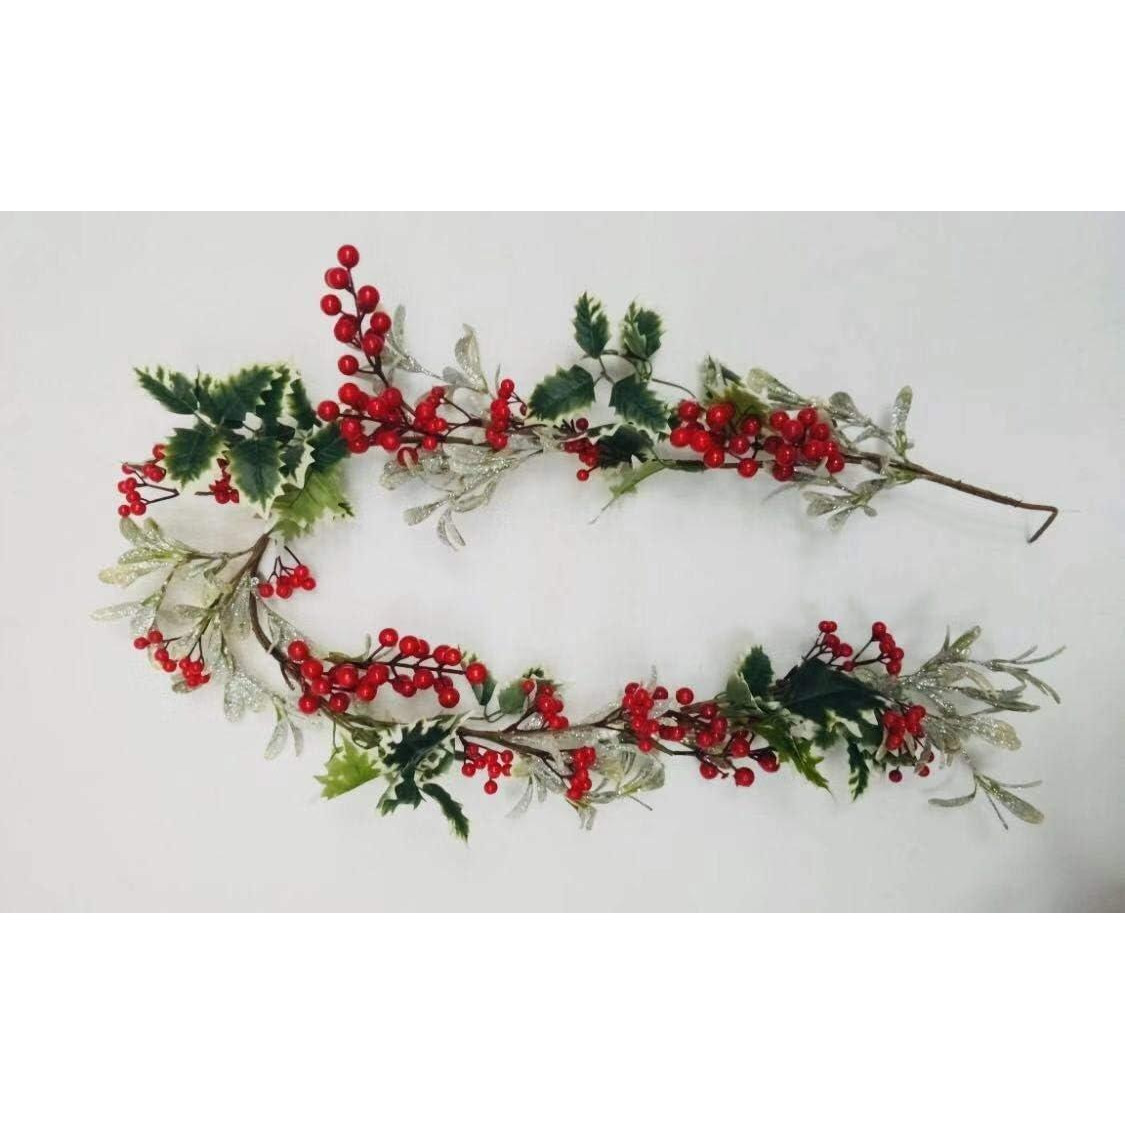 1.5m Natural Looking Artificial Leaves, Berries and Flowers Garland - image 1